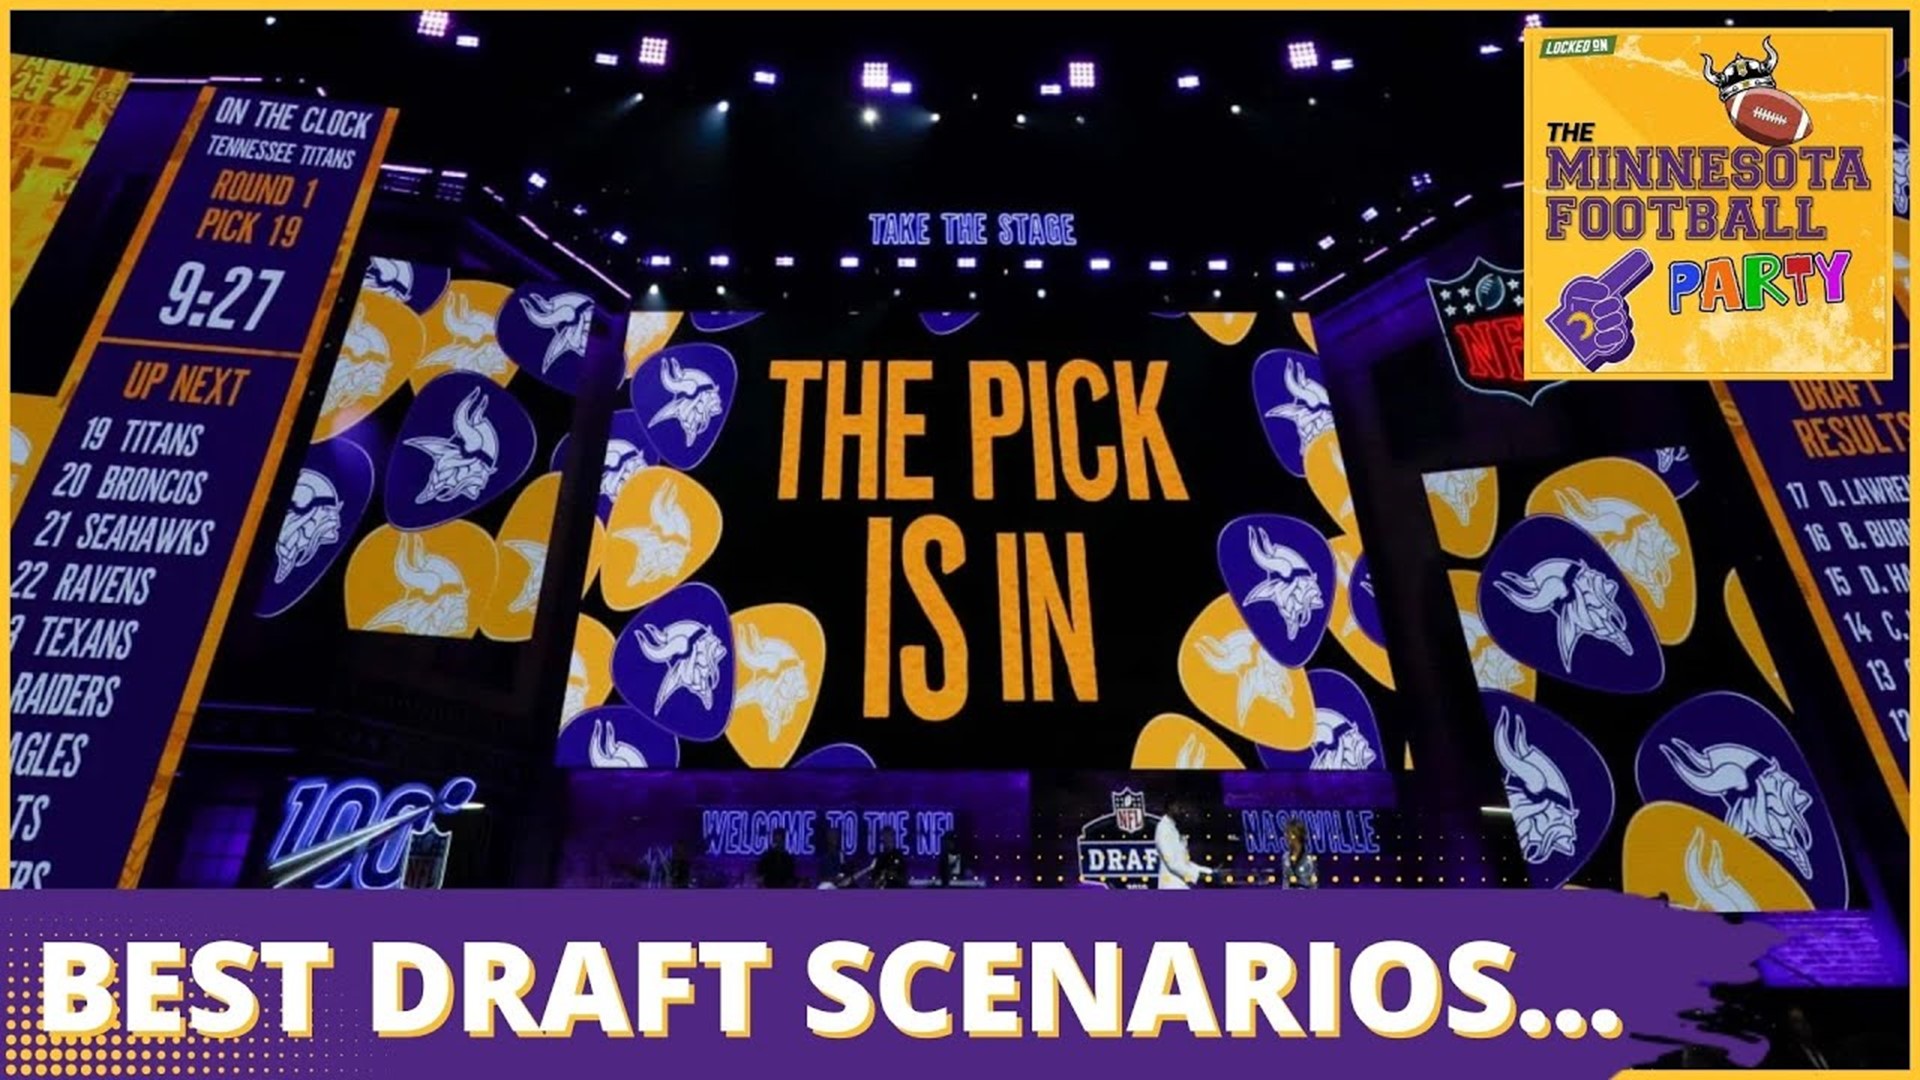 The Minnesota Vikings are officially in draft mode. NFL Draft specialist Luke Inman breaks down the good, better and best case scenarios for the front office.